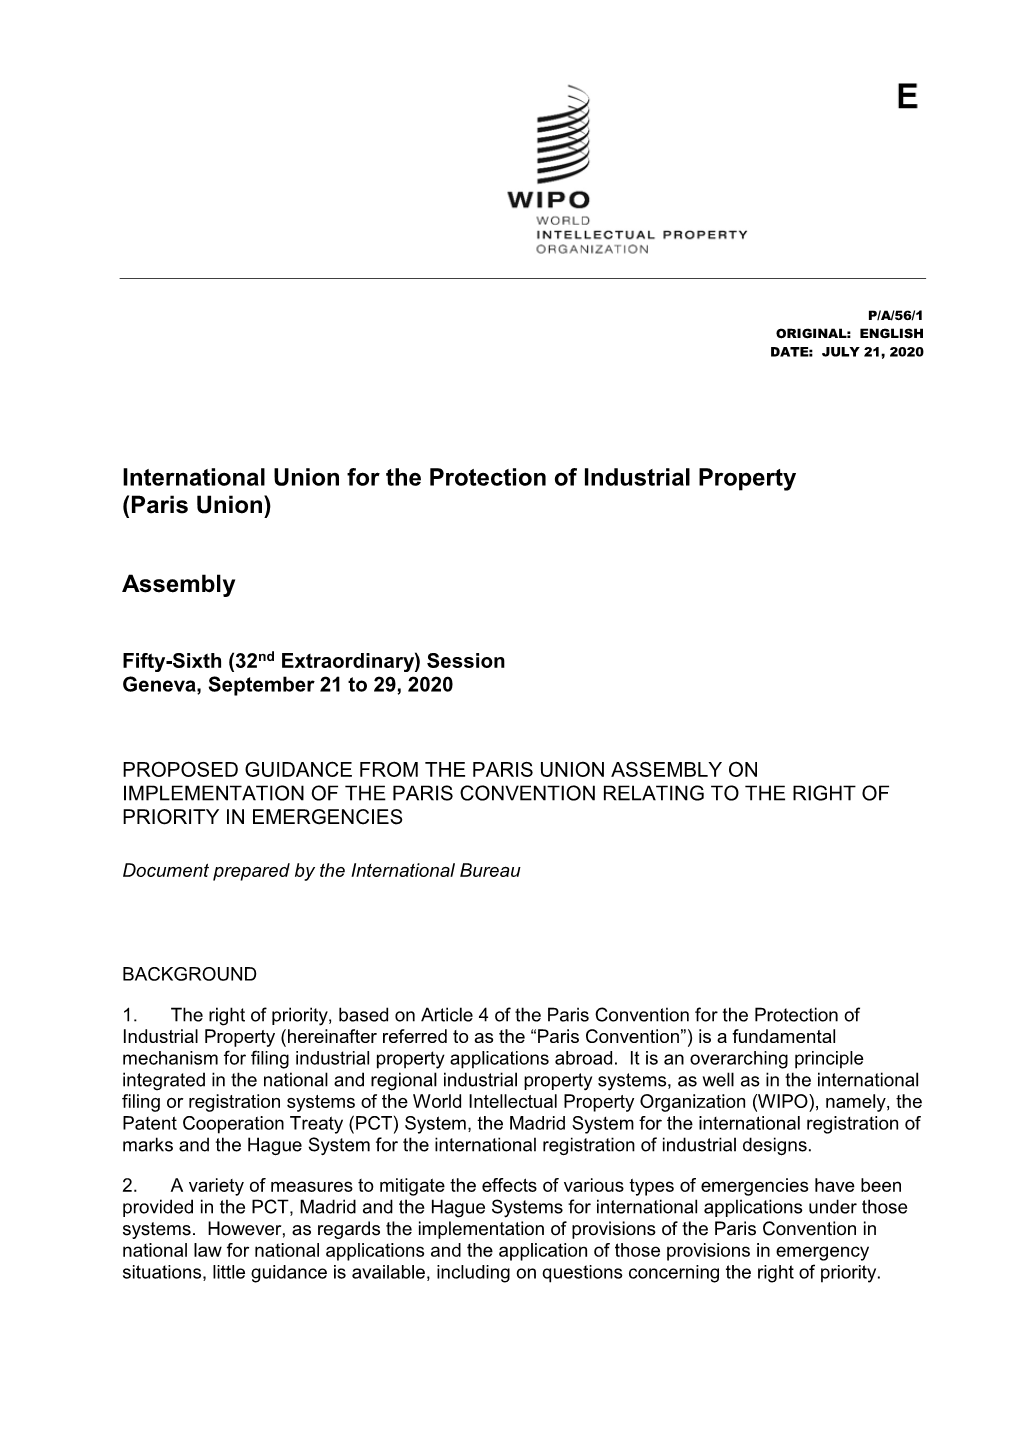 P/A/56/1 Proposed Guidance from the Paris Union Assembly On